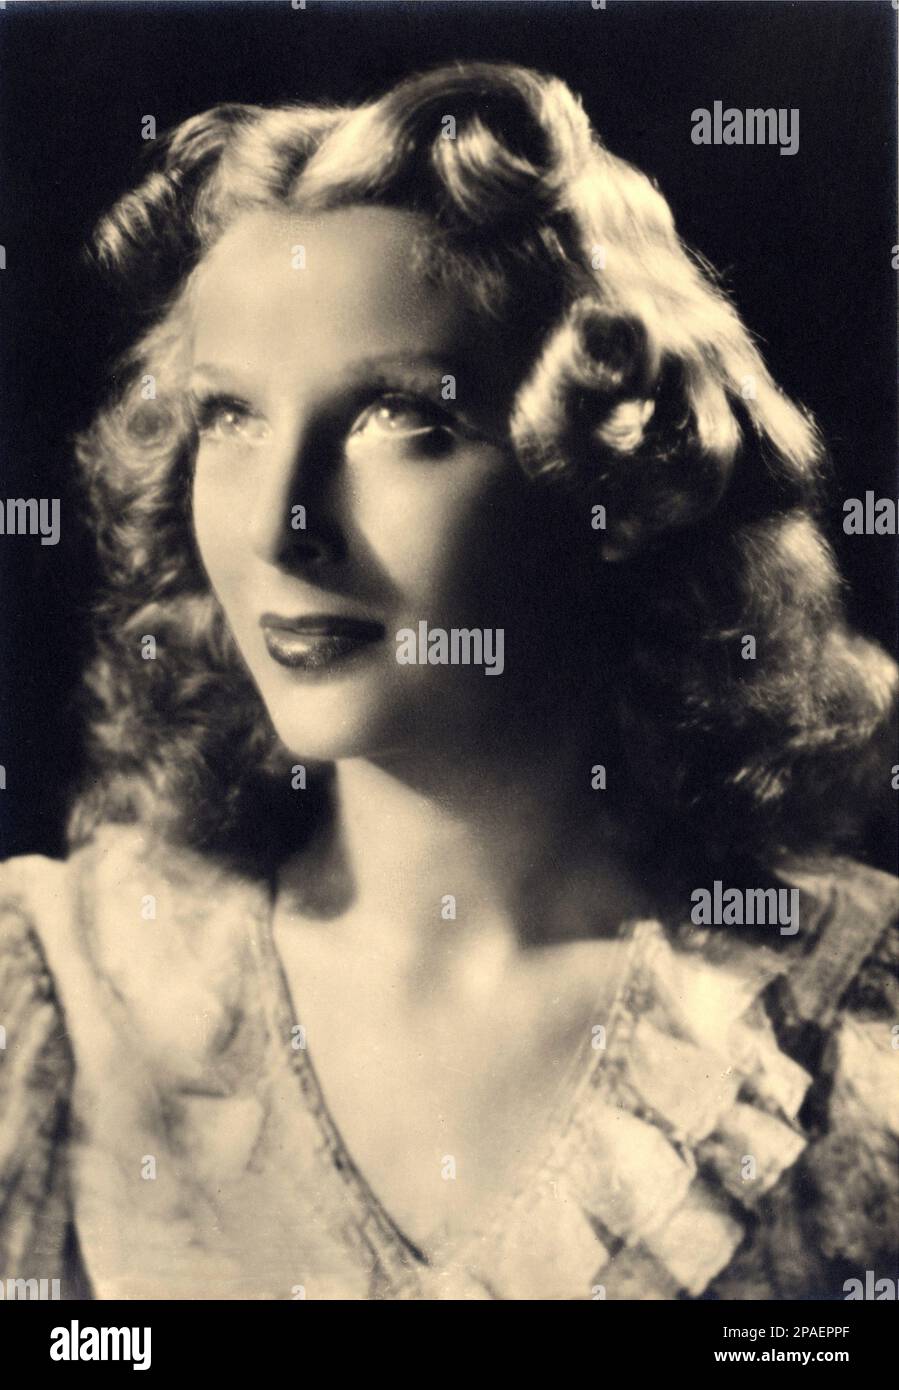 1940 ca : The italian movie actress CATERINA BORATTO ( born in Torino 1915  ) , photo by Giolfi , Roma . In 1938, Metro-Goldwyn-Mayer tycoon Louis B. Mayer offered Boratto a contract. She was invited to Hollywood where she was groomed to be the new Jeanette MacDonald but nothing came out of it and Boratto soon grew impatient. She decided to return to Italy just after the war was declared . - CINEMA - FILM   - ATTRICE  - DIVA - DIVINA - VAMP - CINEMA - TELEFONI BIANCHI - ANNI QUARANTA - 40's  - ritratto - portrait - pizzo - lace - bionda - blonde   ----      ARCHIVIO GBB Stock Photo